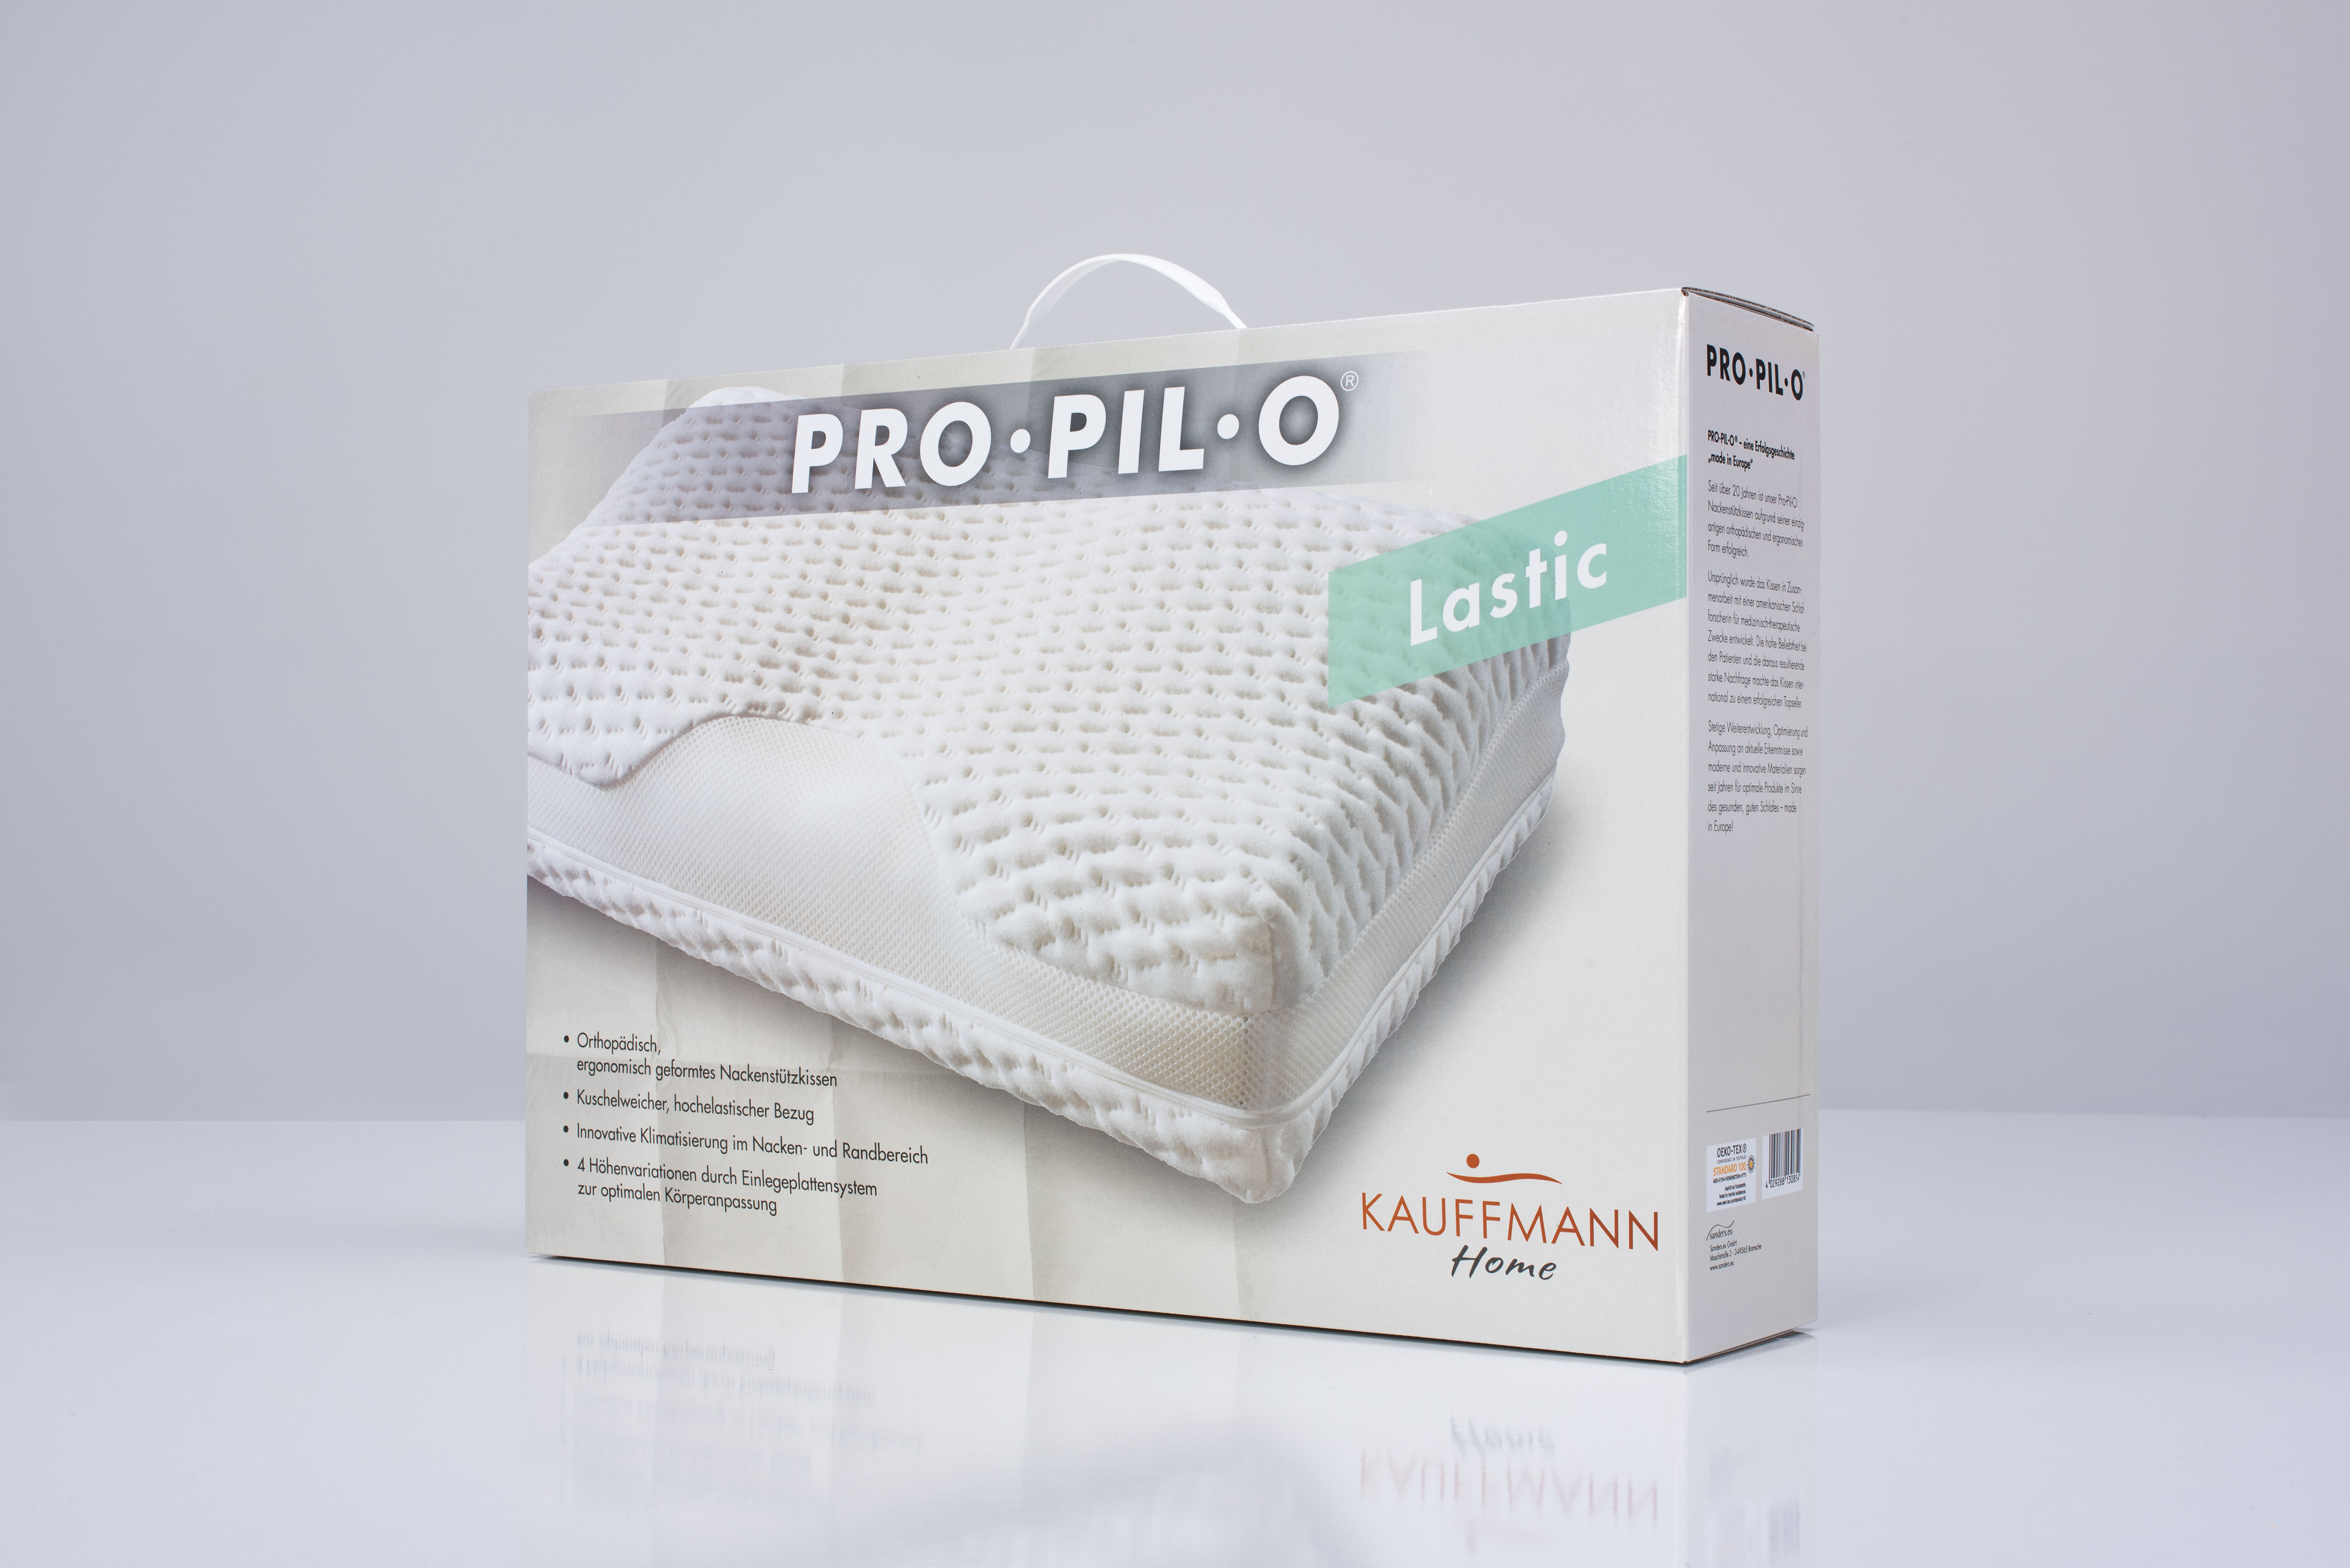 PRO-PIL-O Lastic neck support pillow